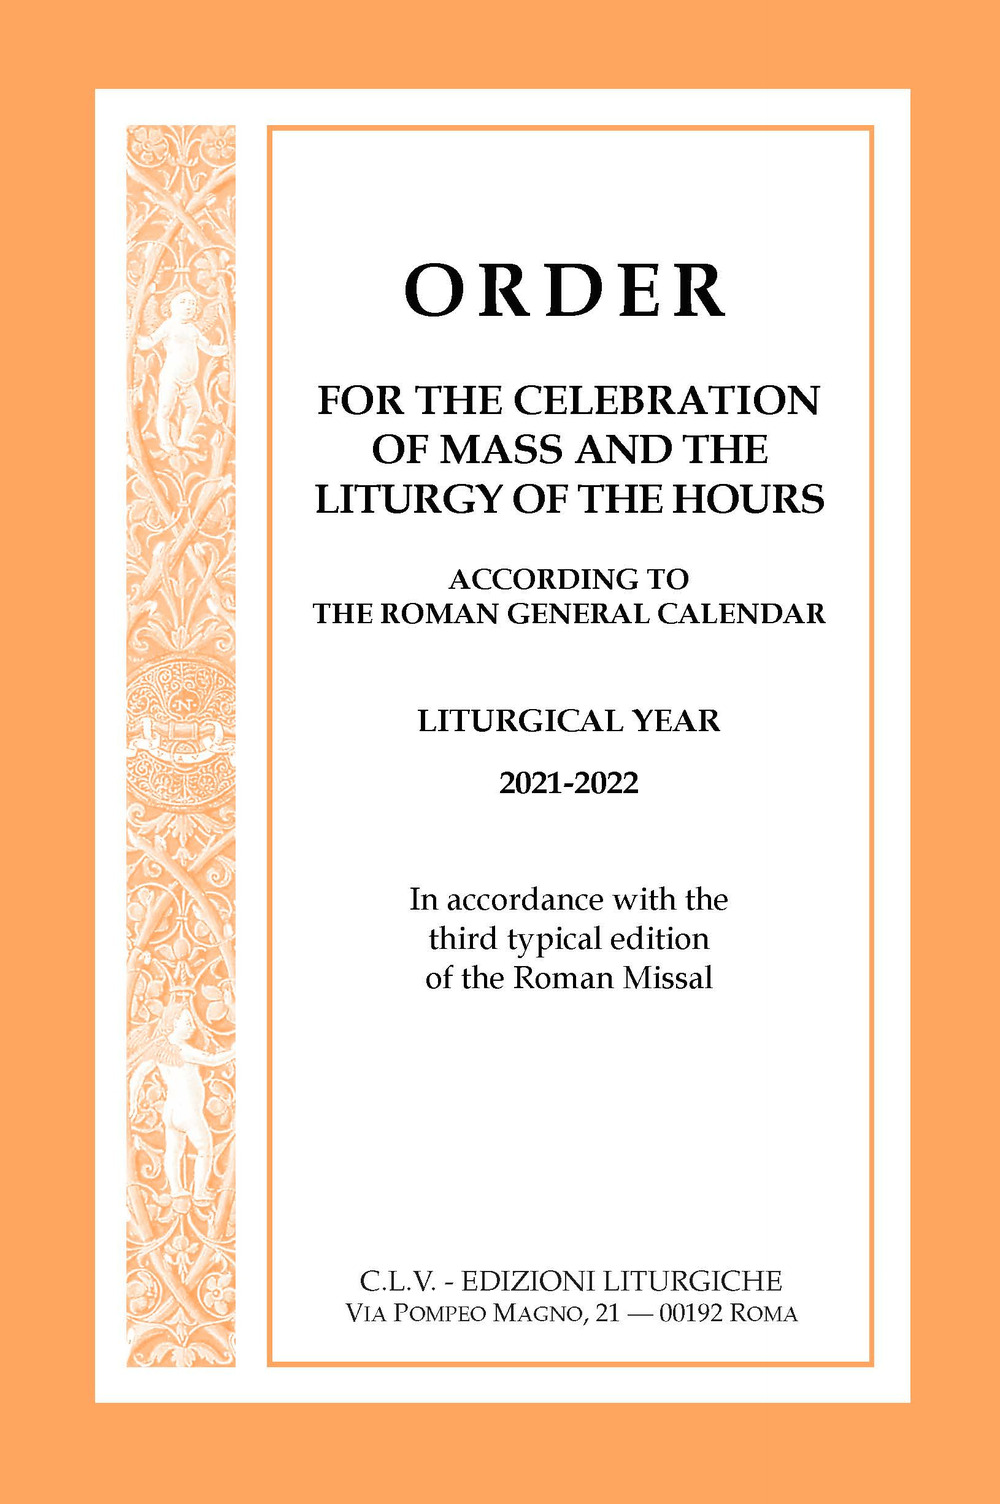 Order for the celebration of Mass and the Liturgy of the Hours according to the Roman General Calendar. Liturgical Year 2021-2022. In accordance with the third typical edition of the Roman Missal